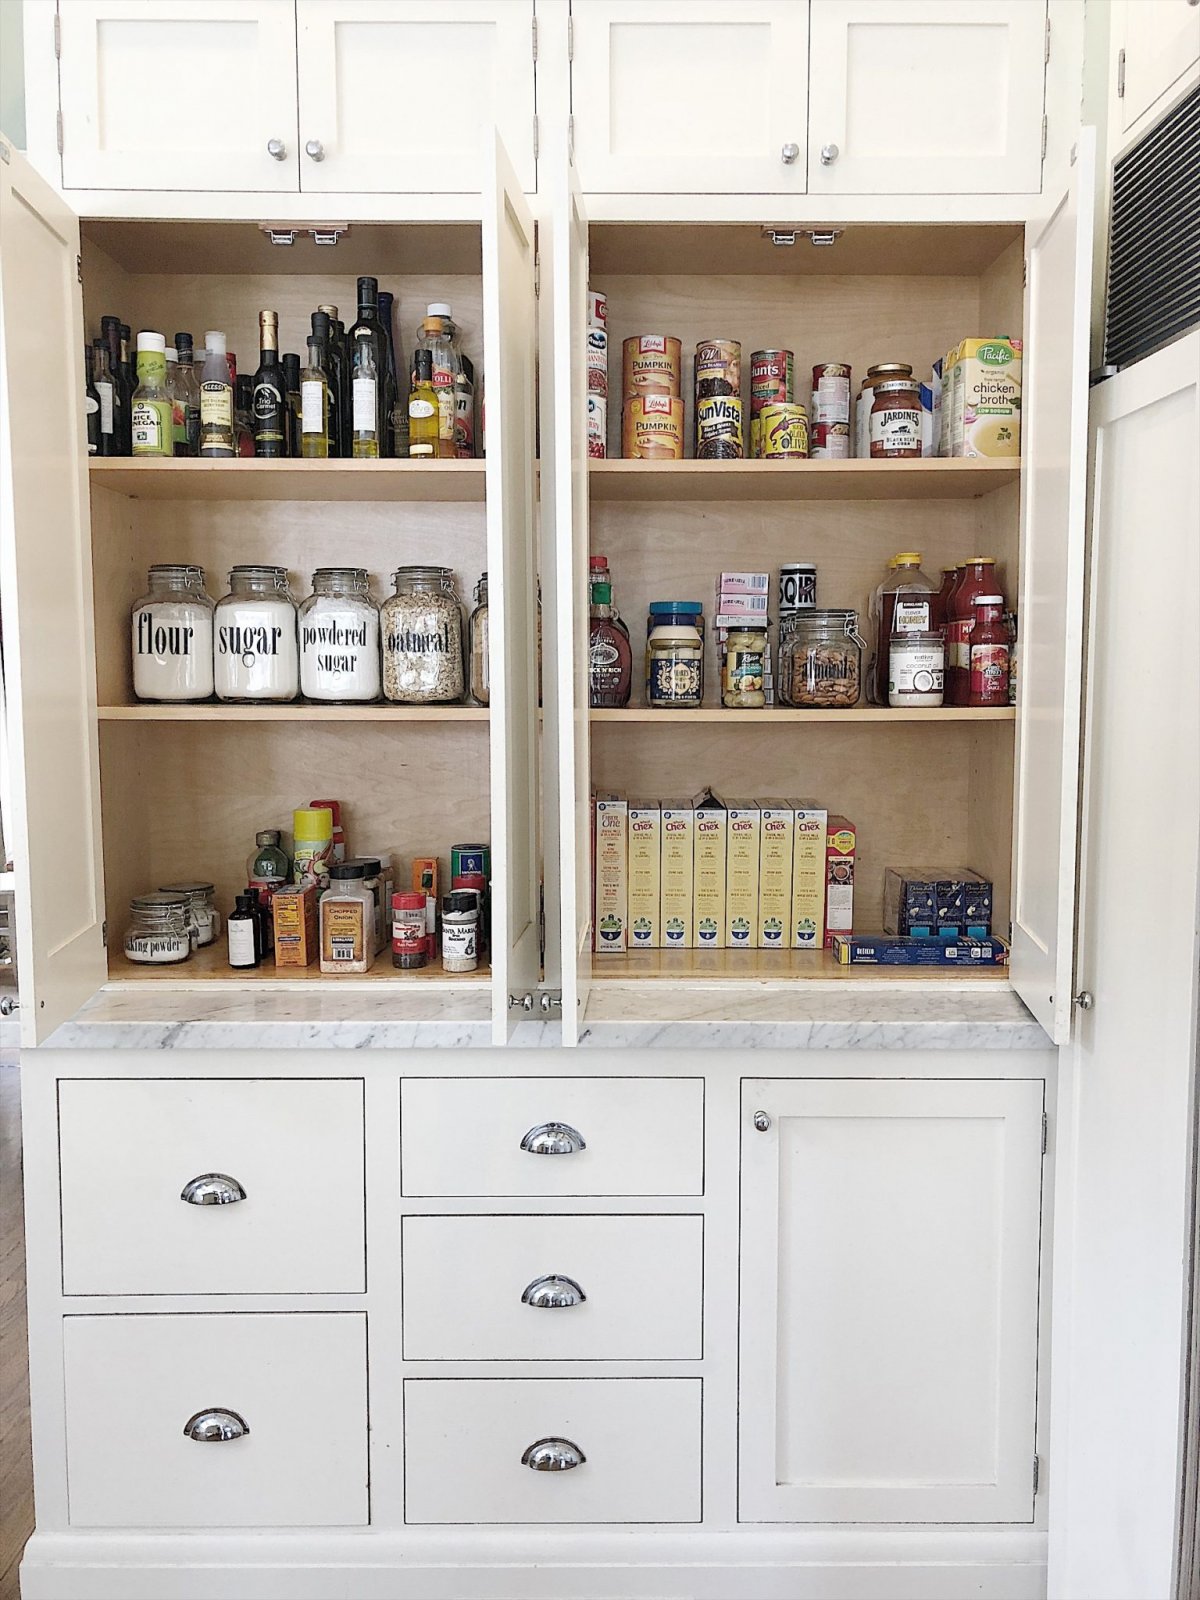 https://my100yearoldhome.com/wp-content/uploads/2019/12/organizing-your-pantry-scaled.jpg